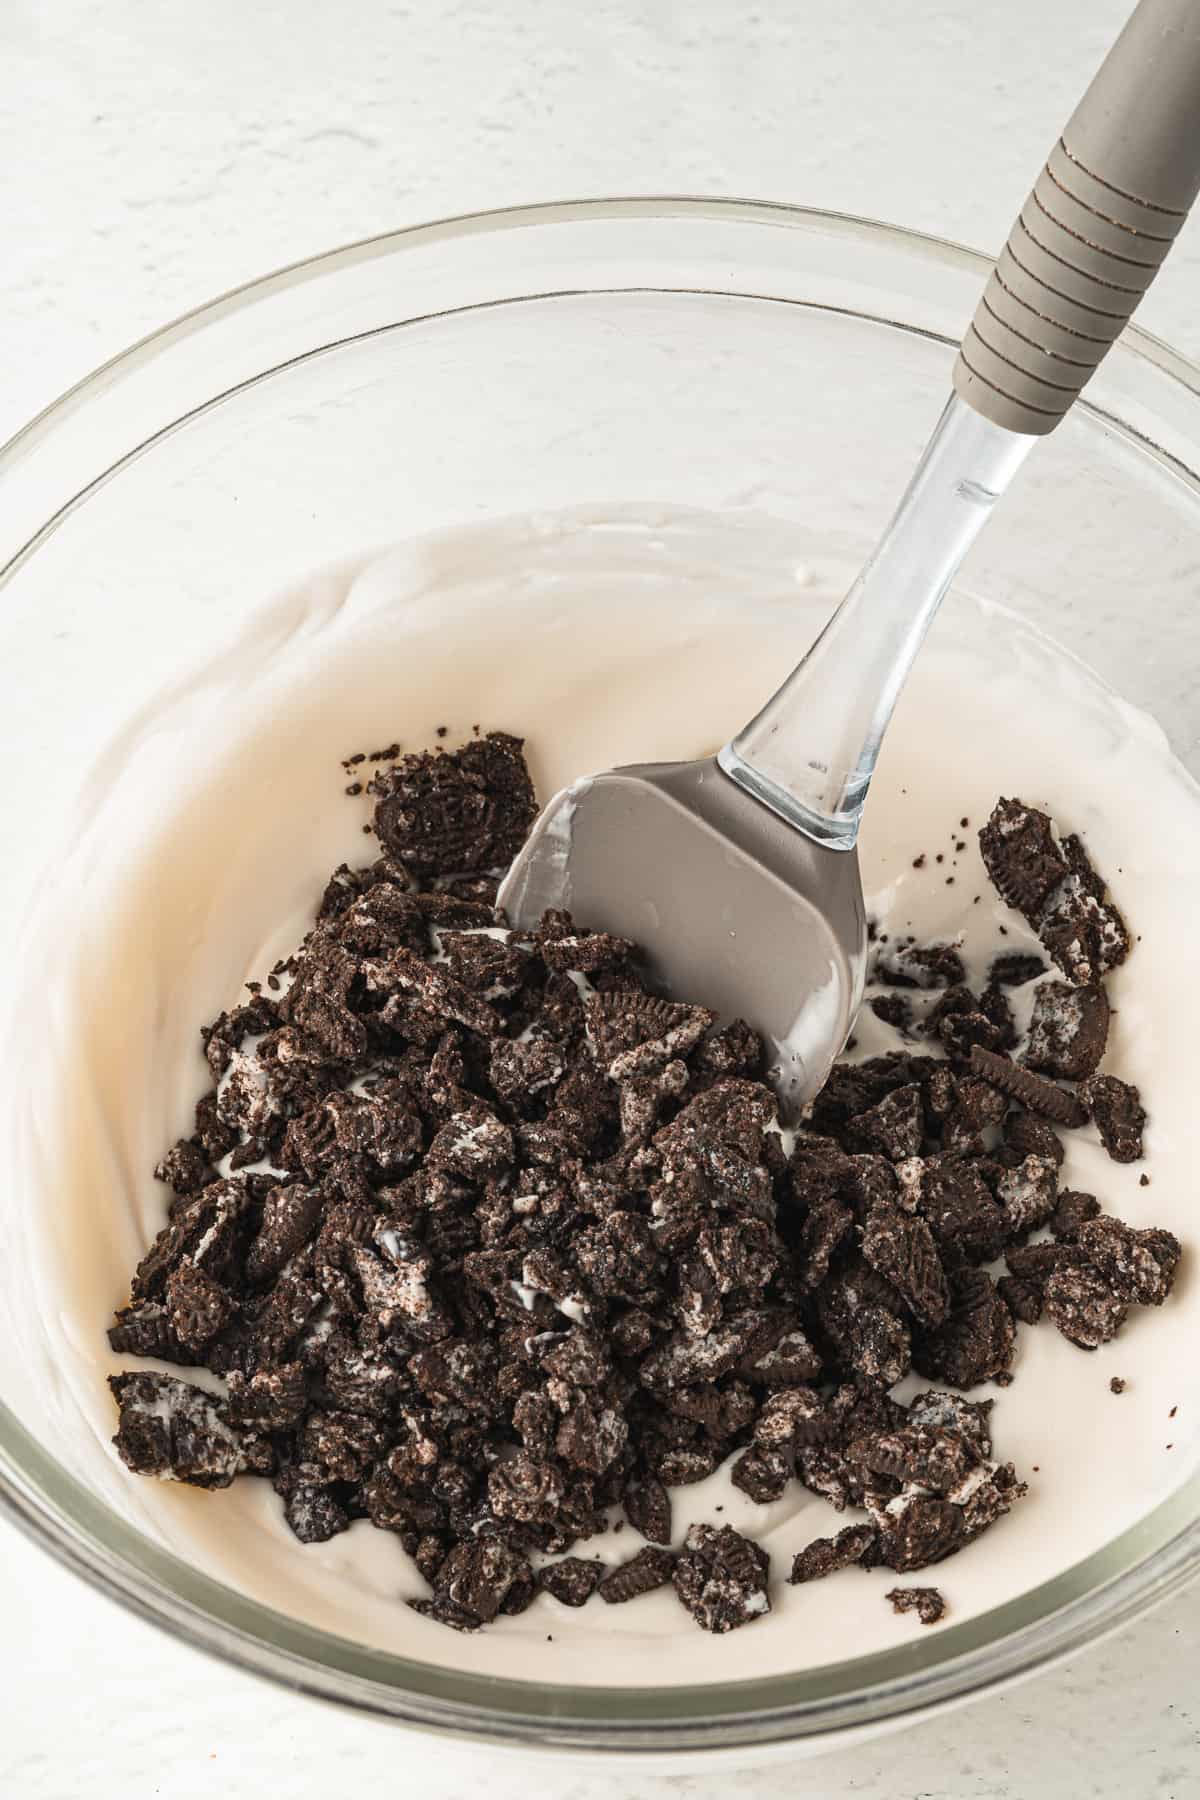 add crushed Oreo cookies to the ice cream